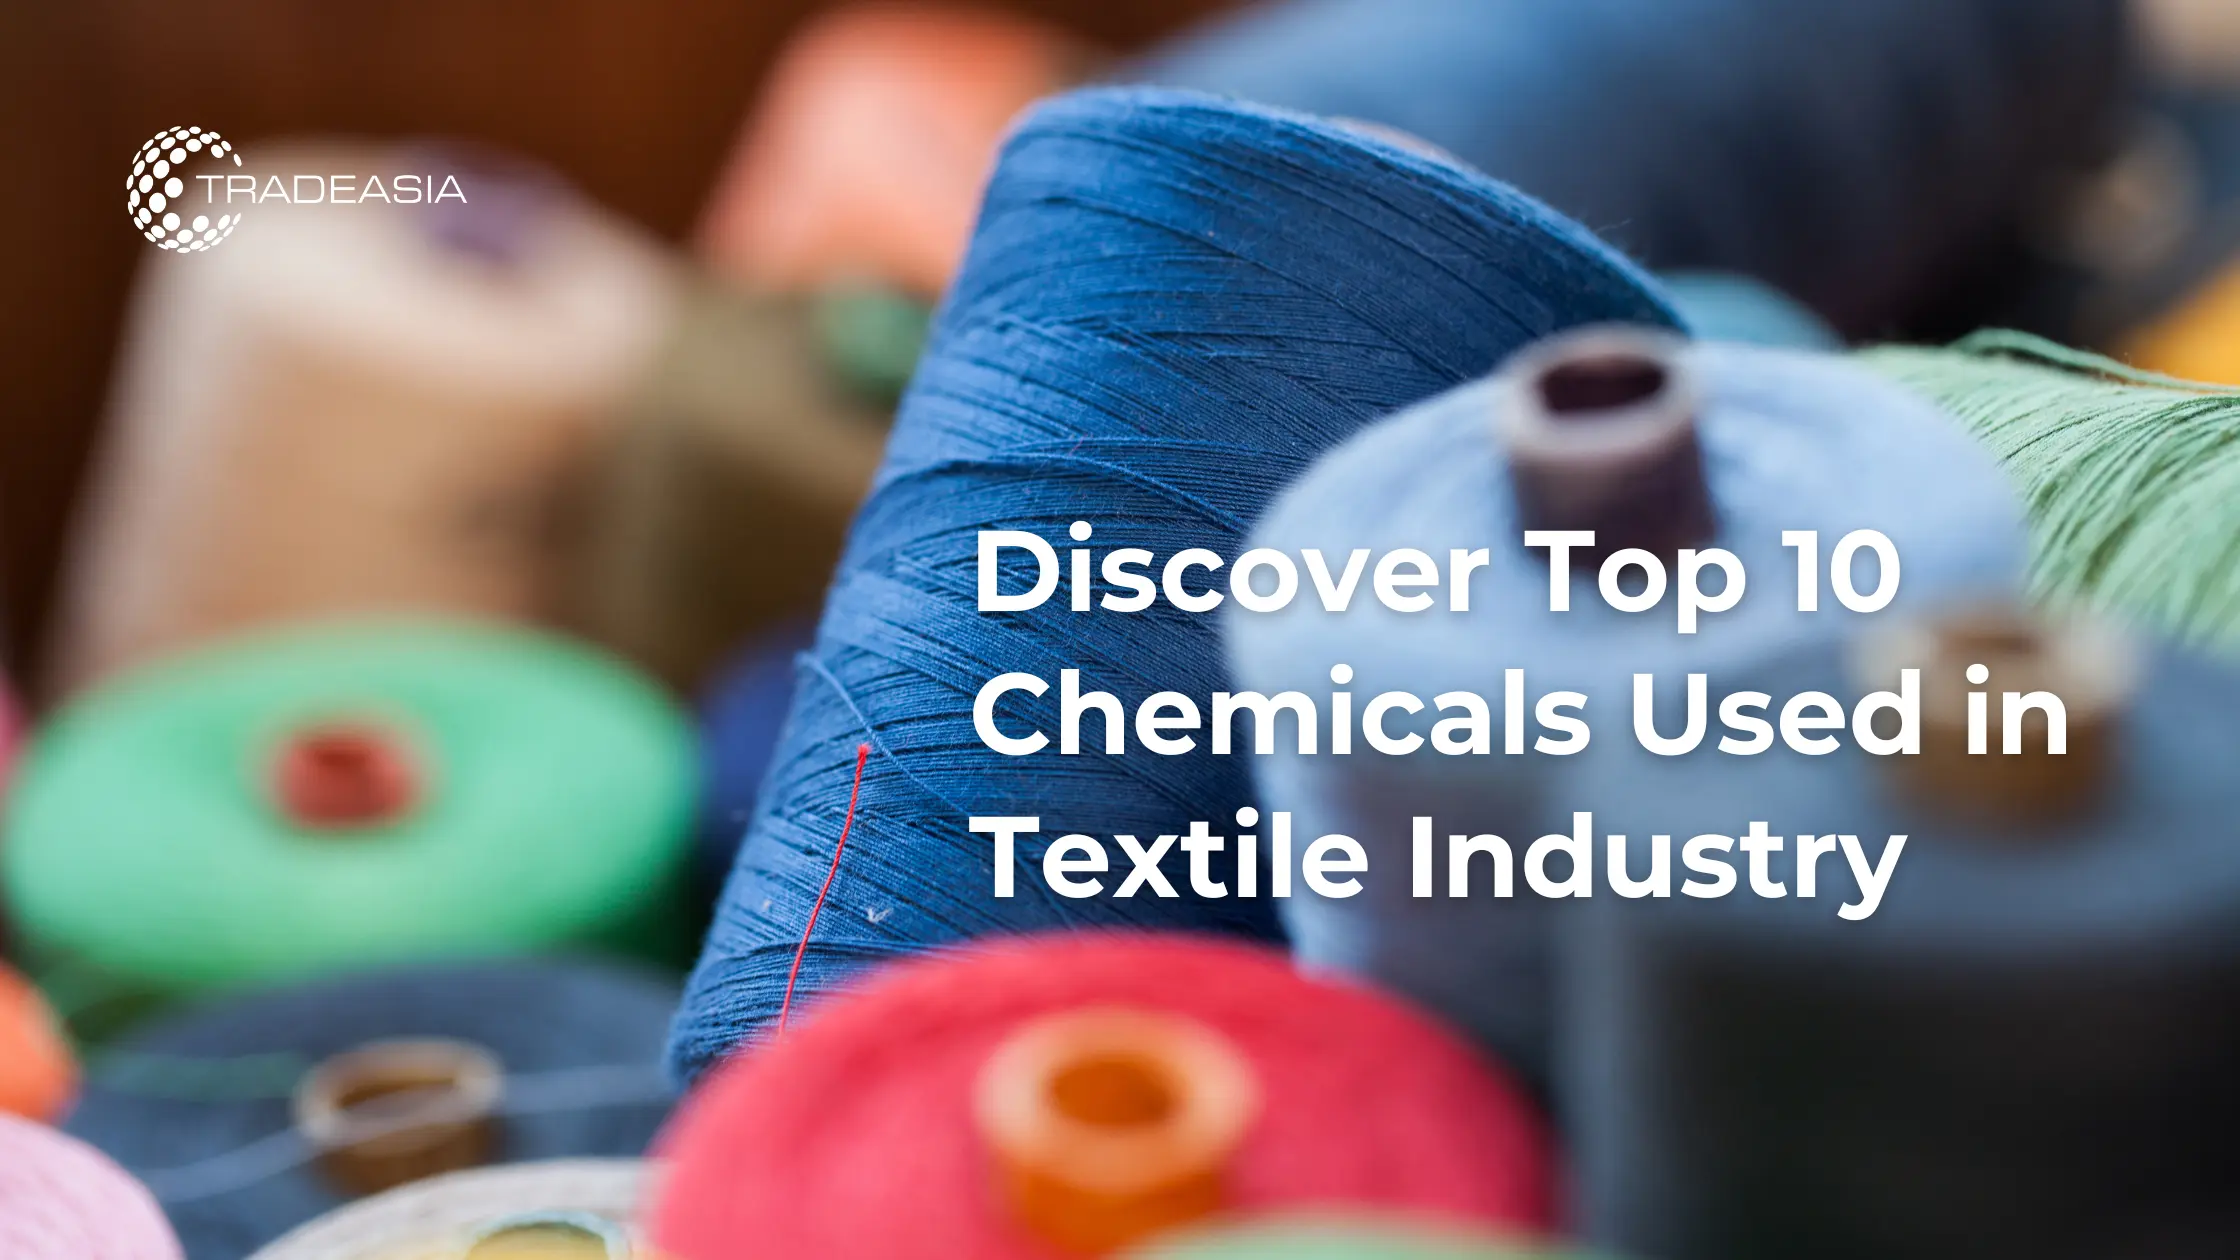 Discover Top 10 Chemicals Used in Textile Industry